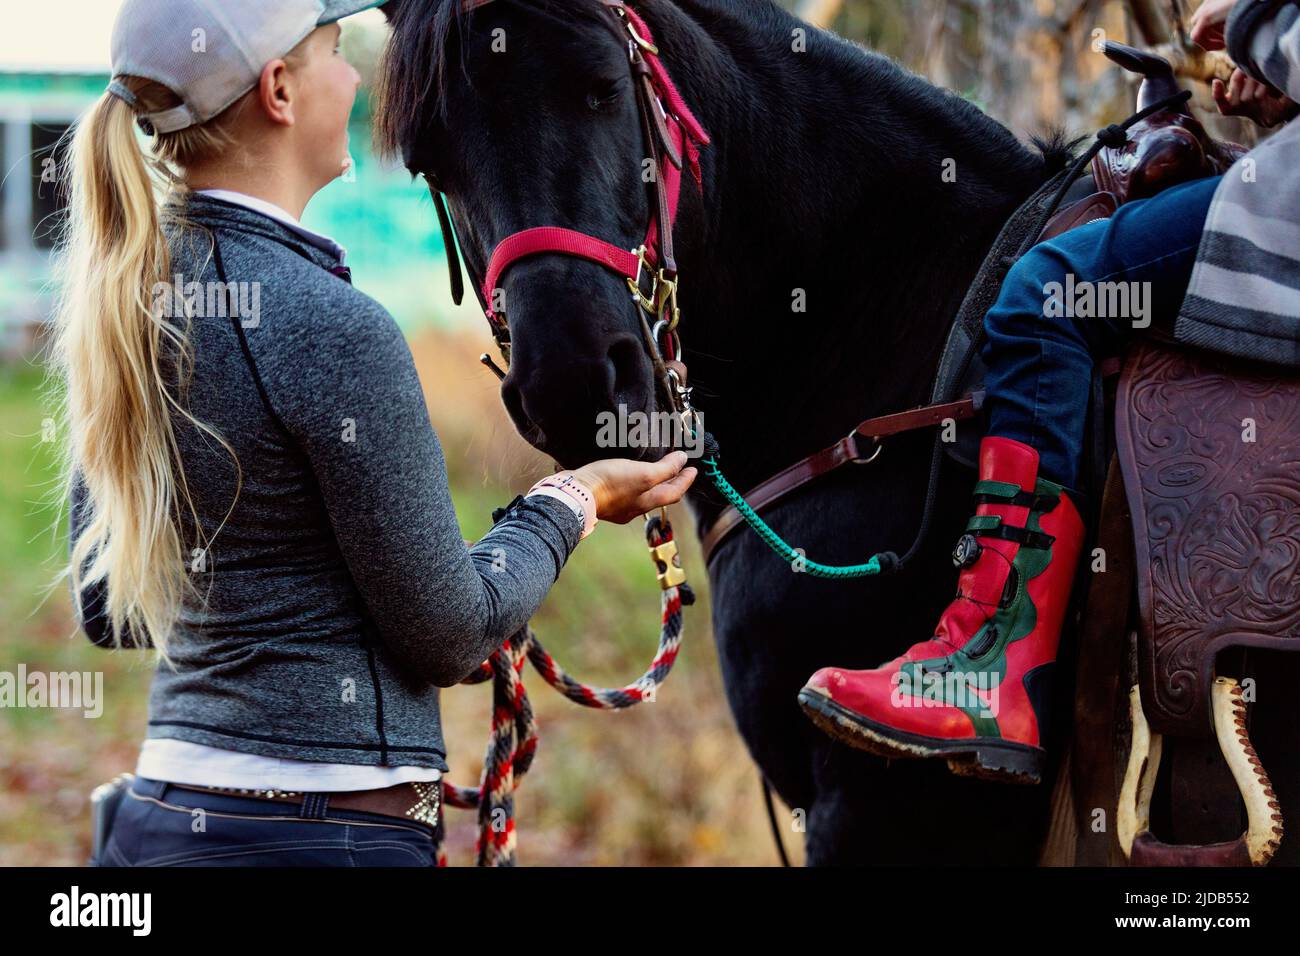 A young girl with Cerebral Palsy and her trainer stop to get a treat of apples for a horse during a Hippotherapy session; Westlock, Alberta, Canada Stock Photo